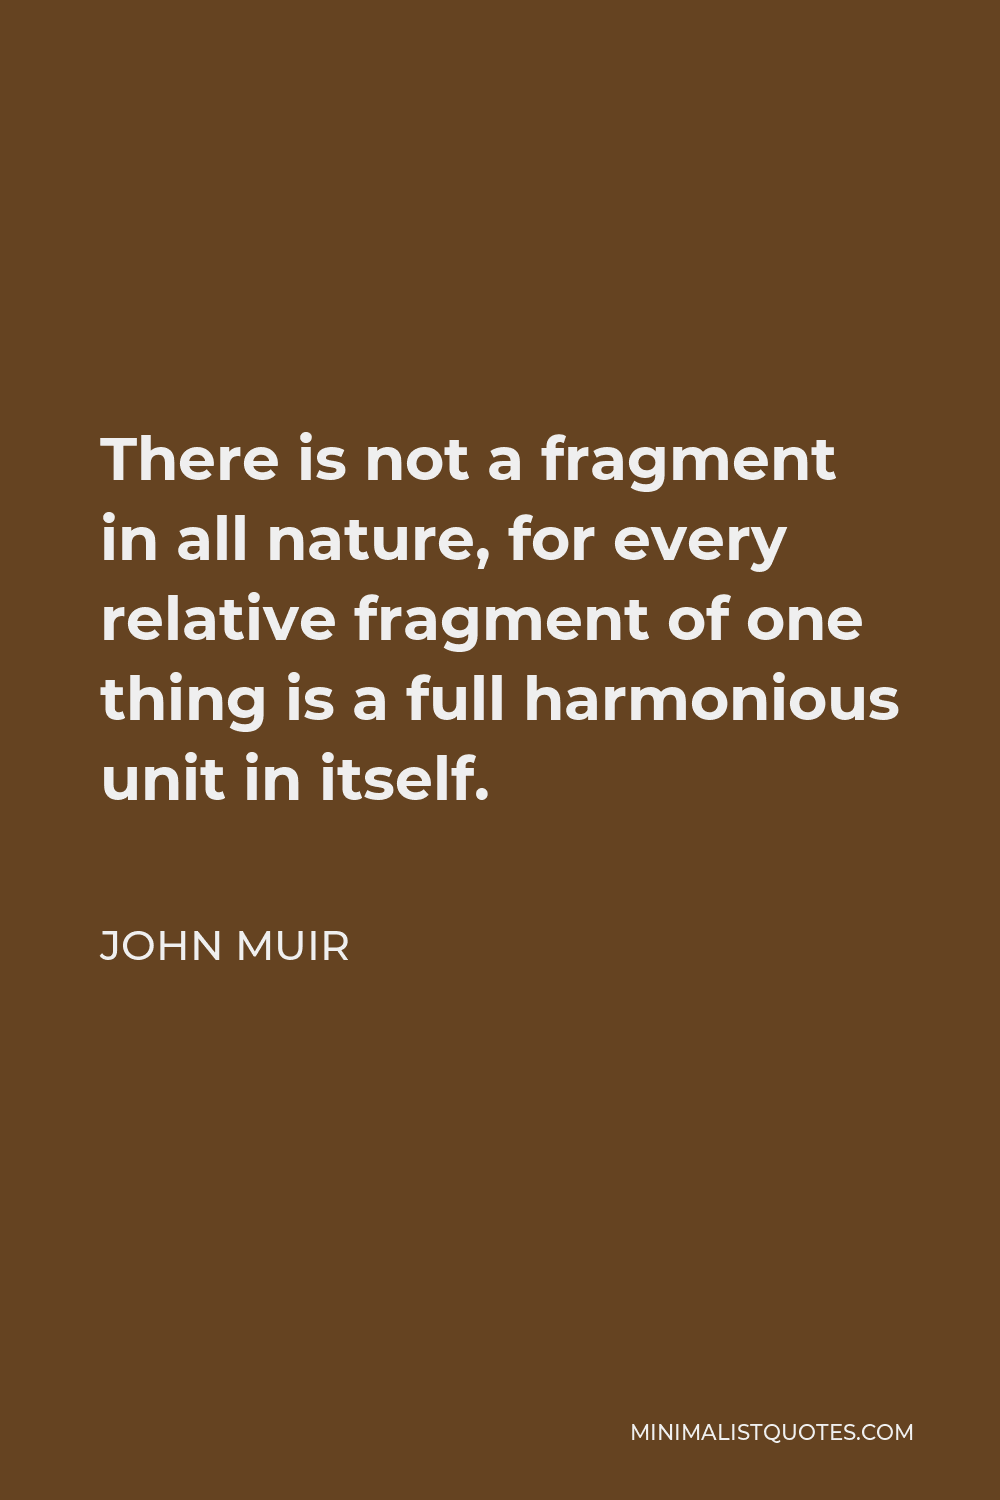 John Muir Quote - There is not a fragment in all nature, for every relative fragment of one thing is a full harmonious unit in itself.